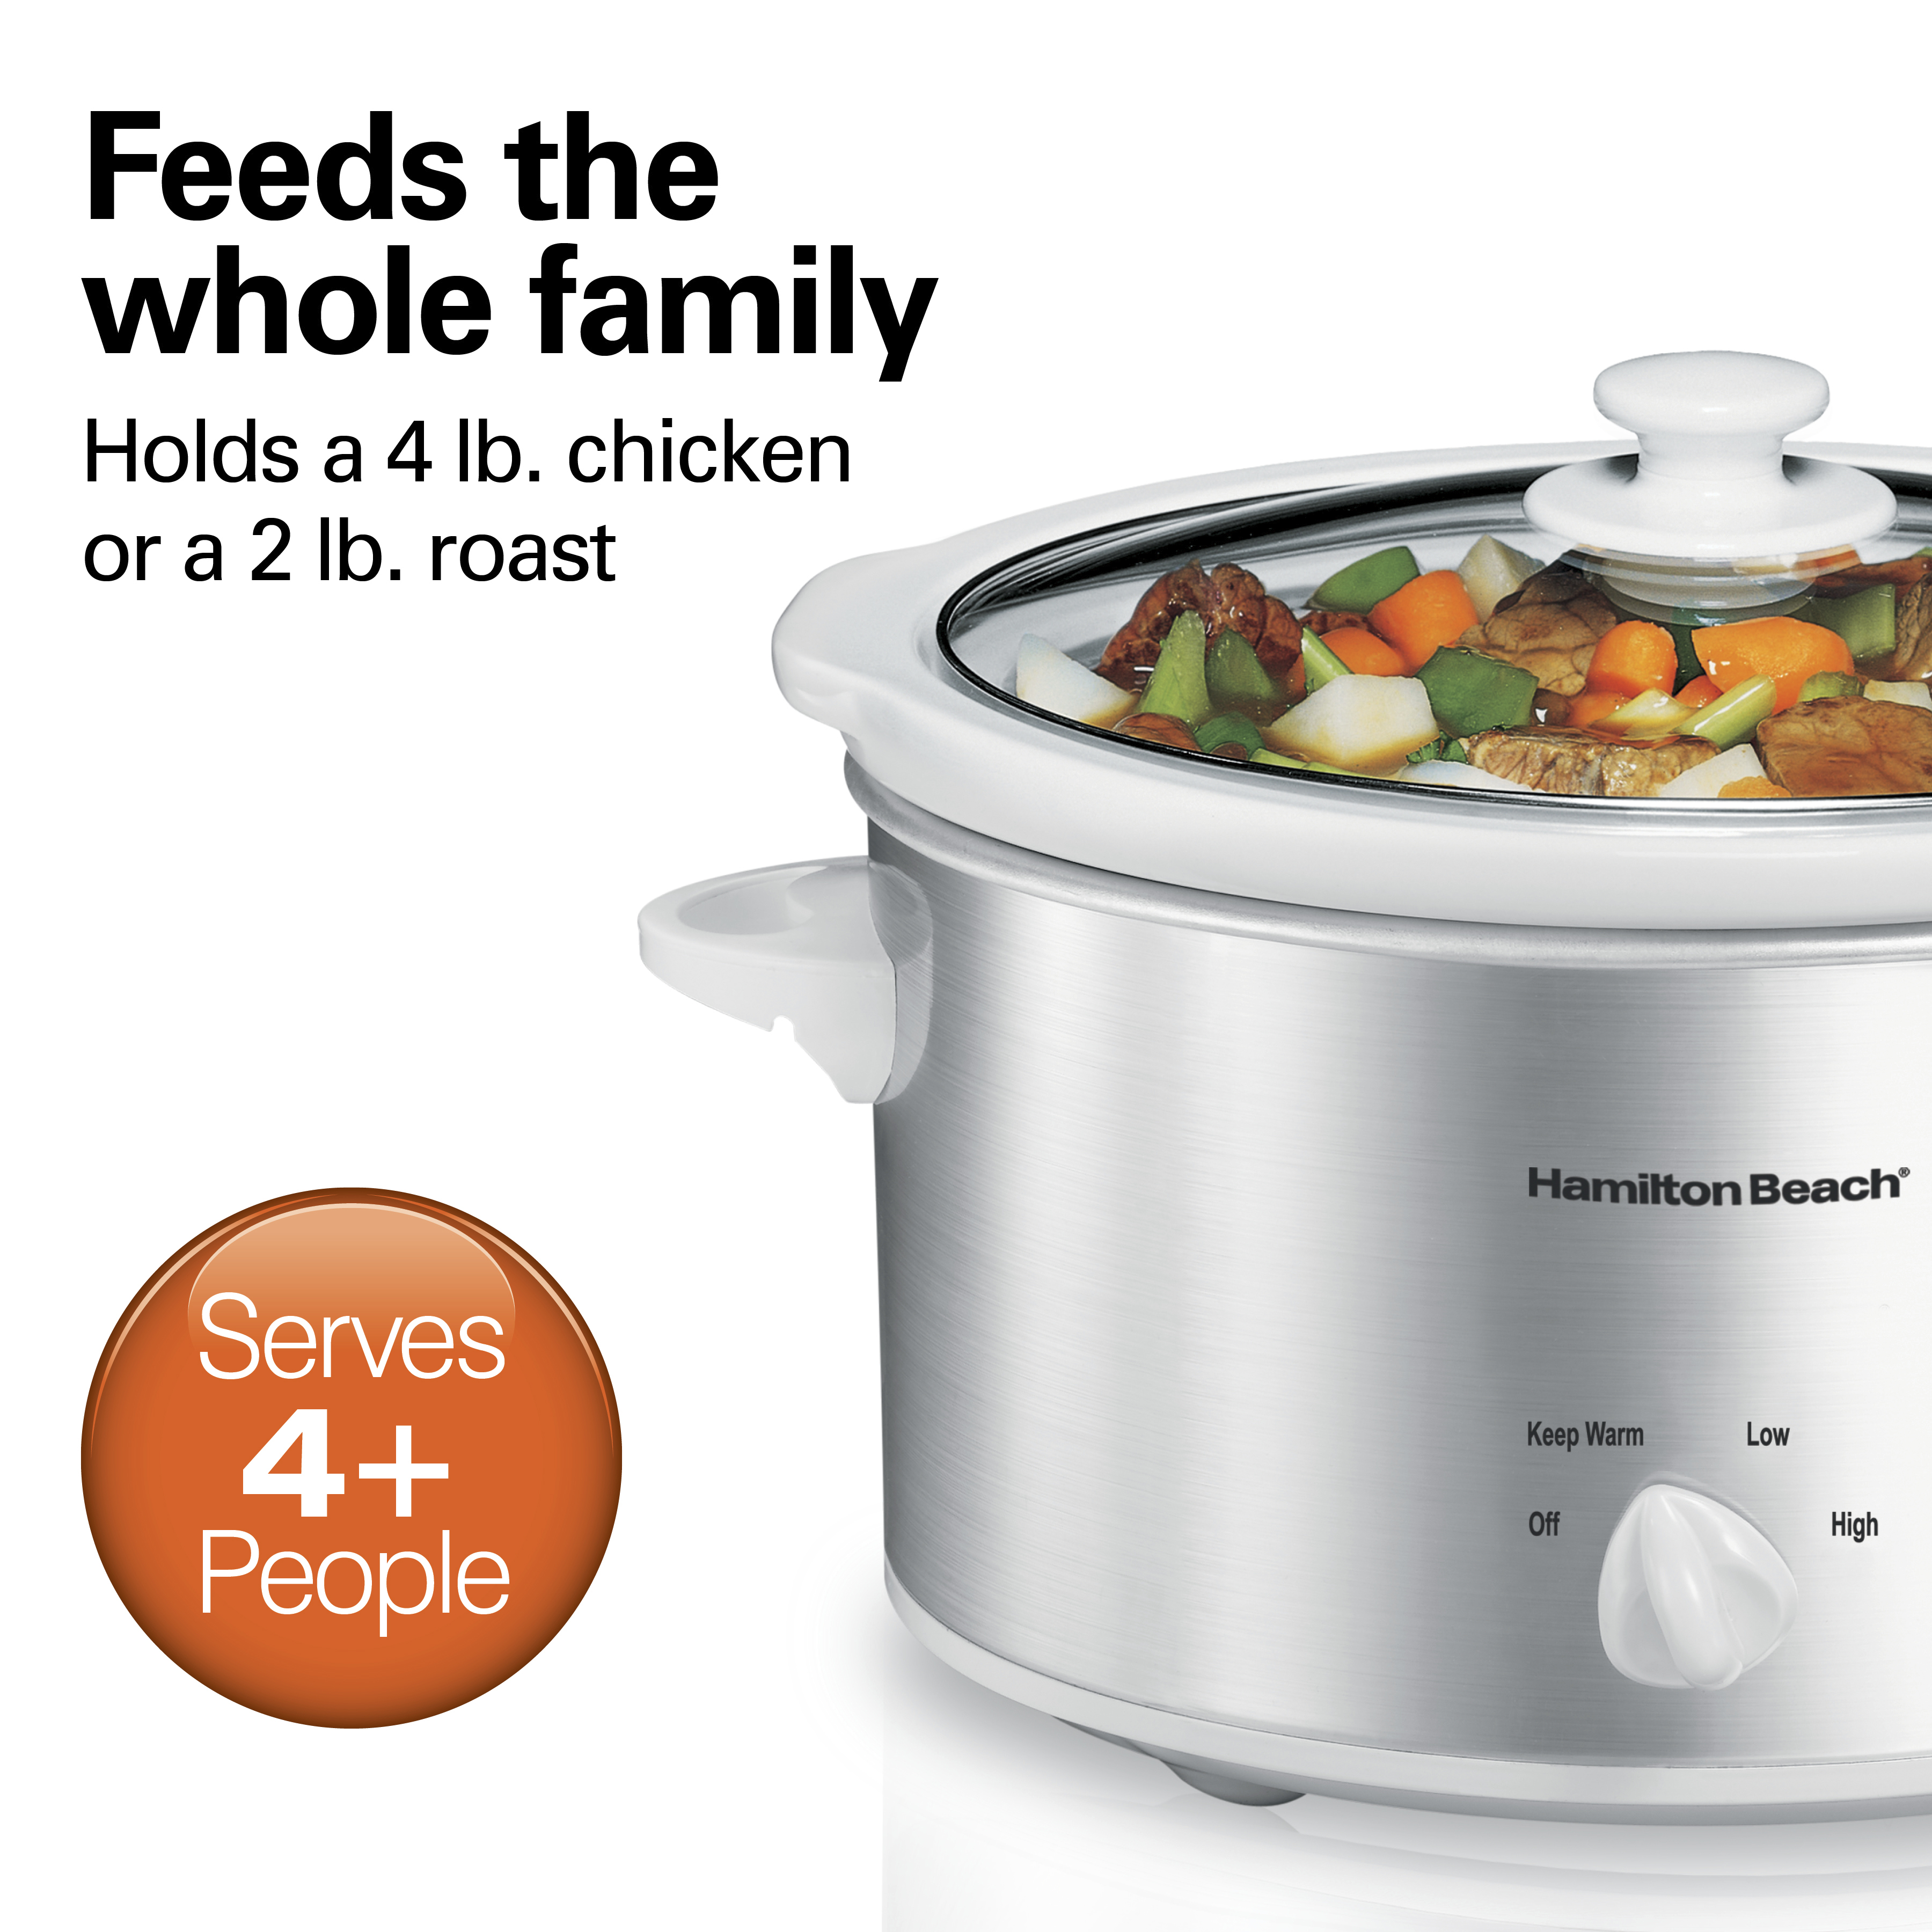 Hamilton Beach Slow Cooker, 4 Quart Capacity, Serves 4+ People, Removable Crock, White and Silver, 33140 - image 5 of 8